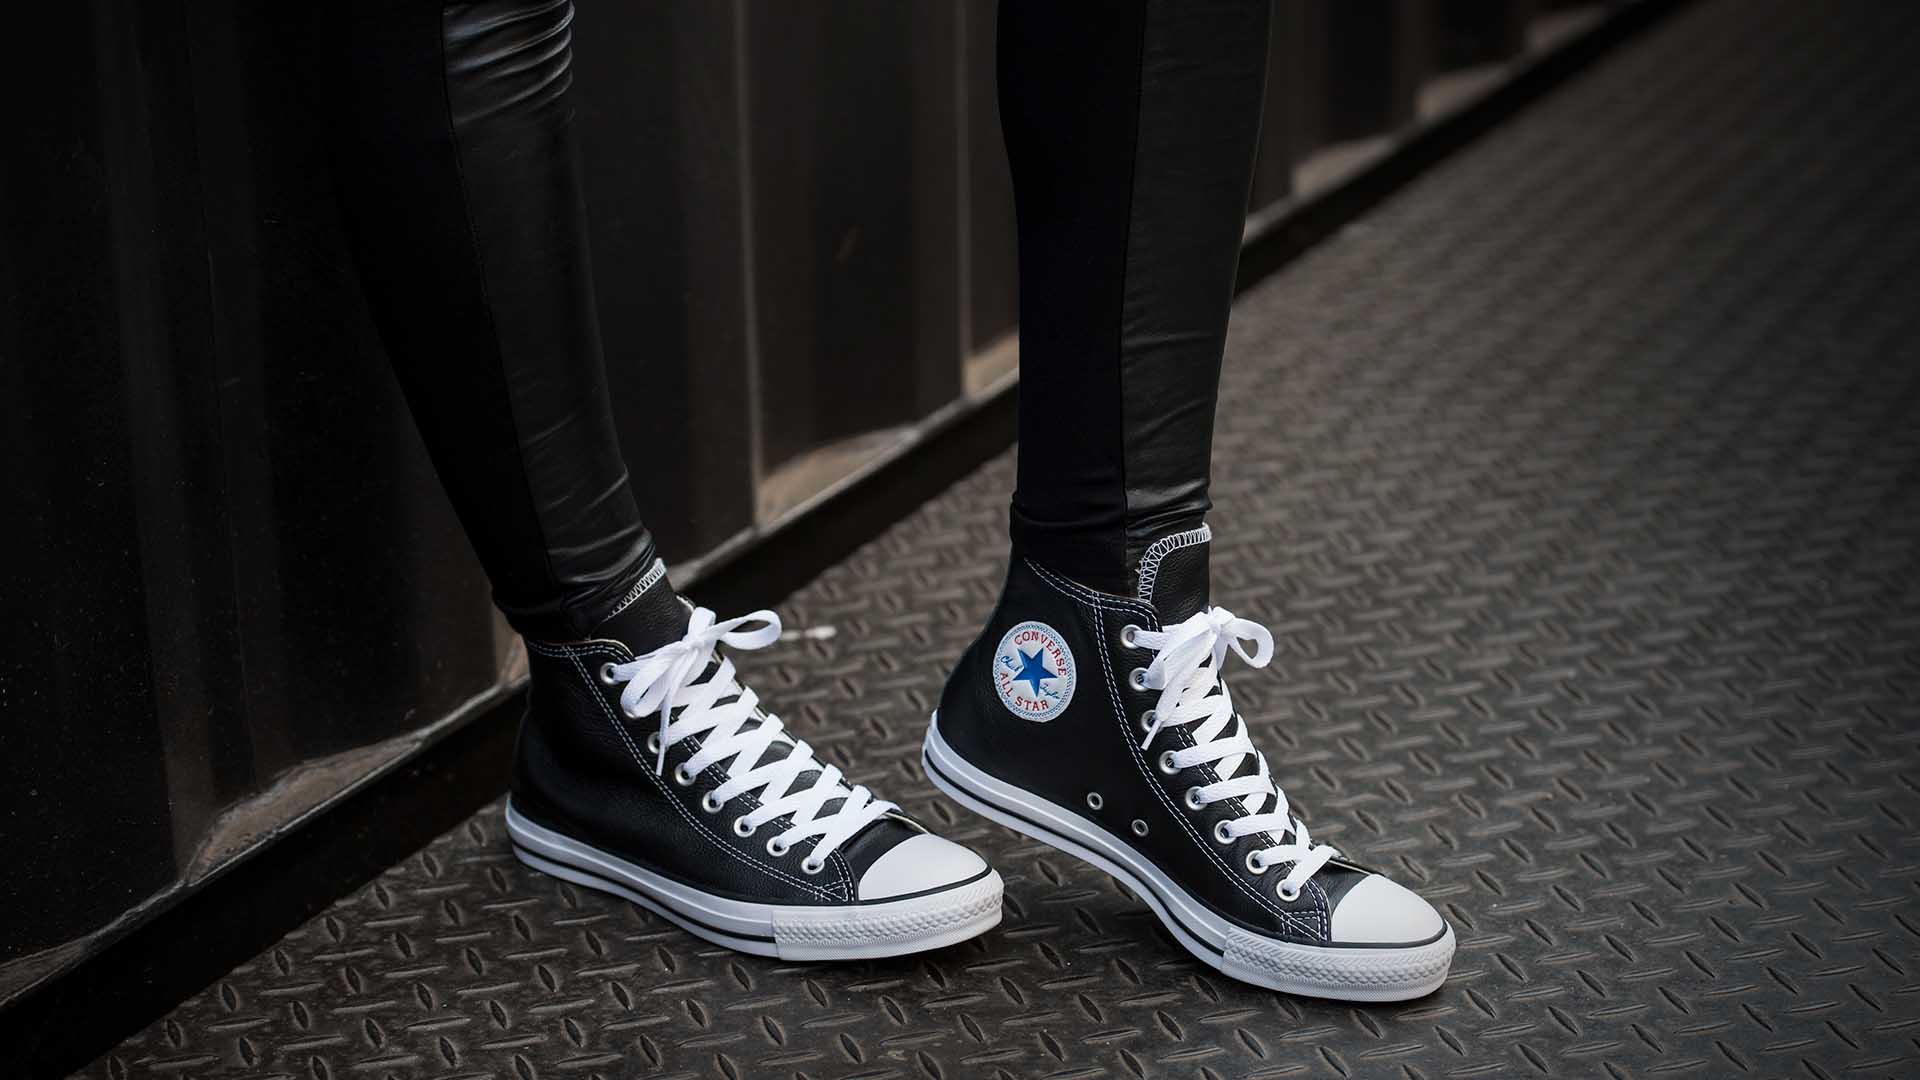 Converse Shoes Wallpapers